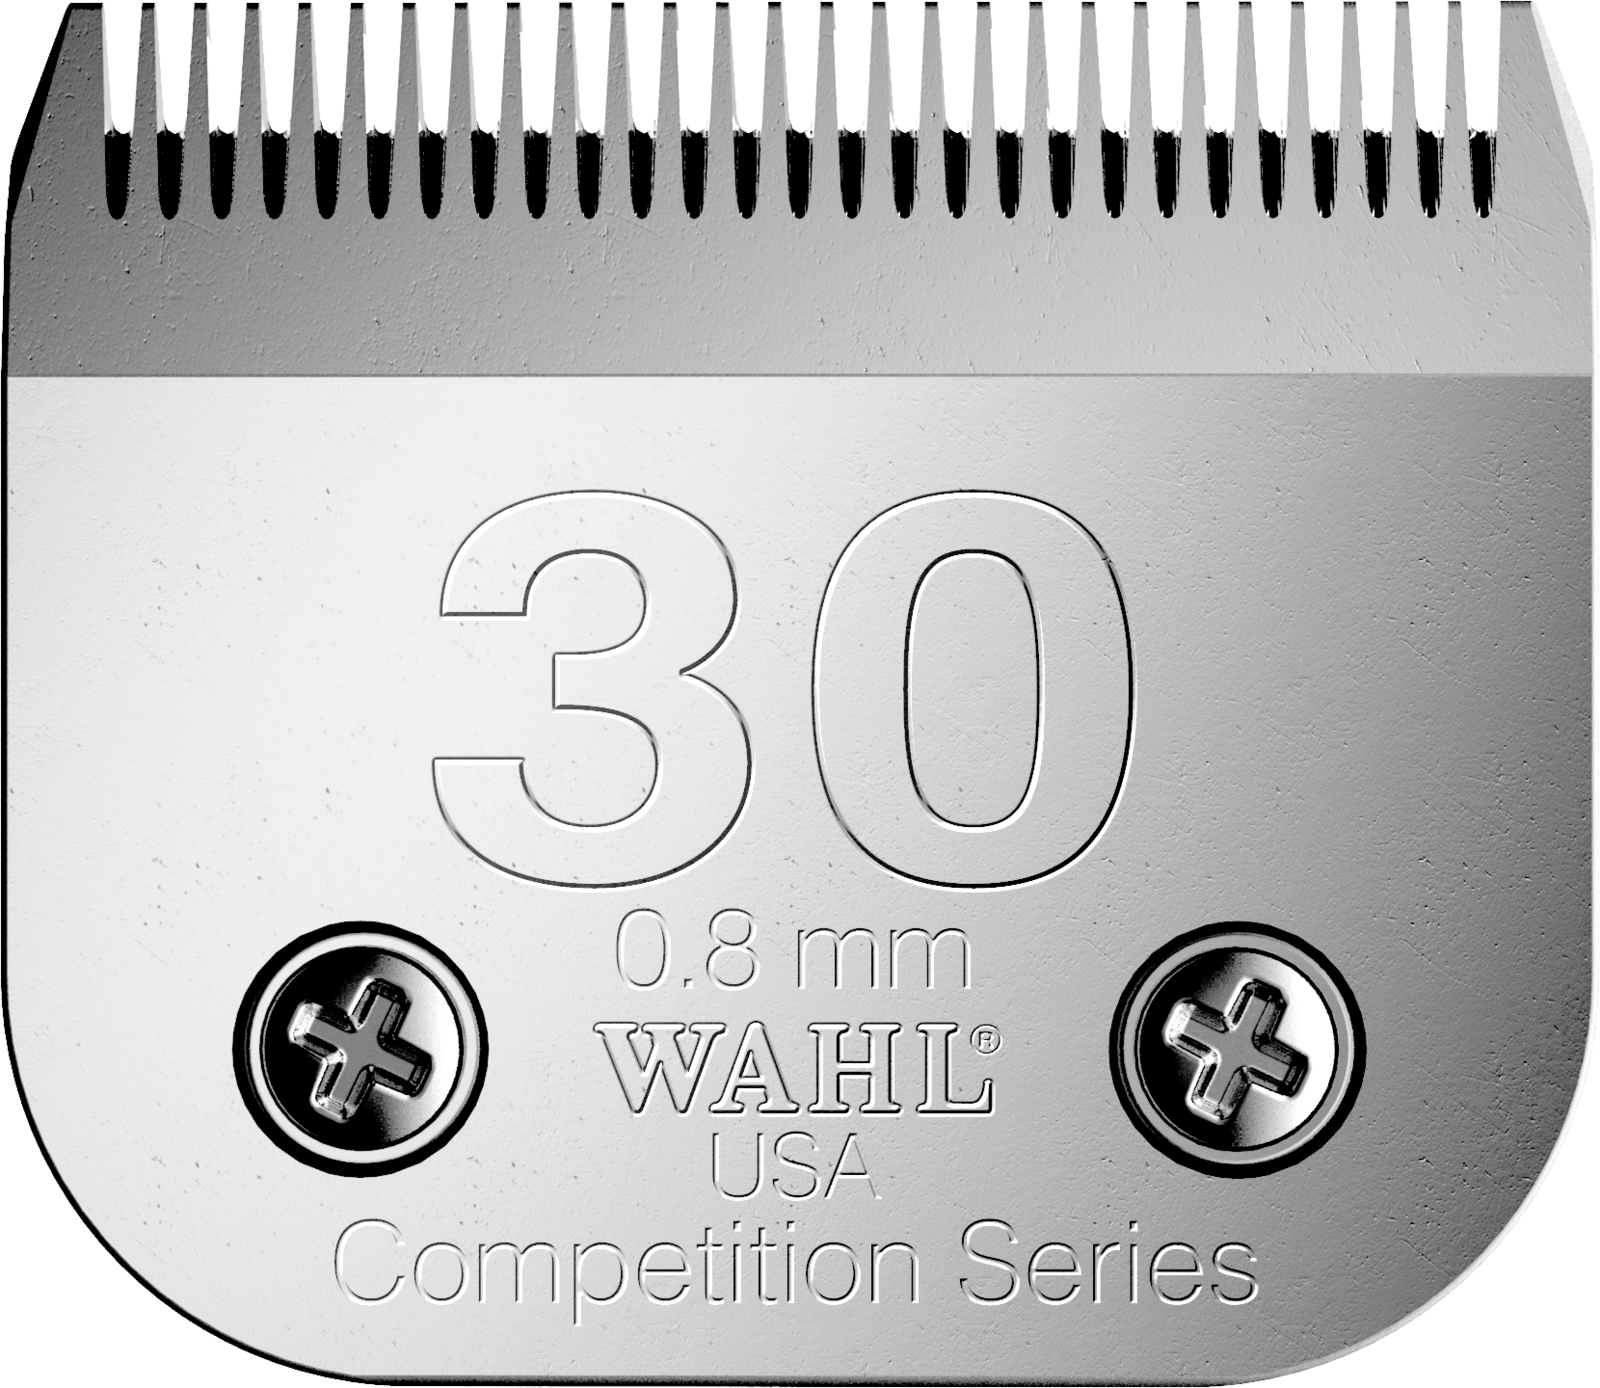 Wahl Competition Blade Size 30, 0.8mm